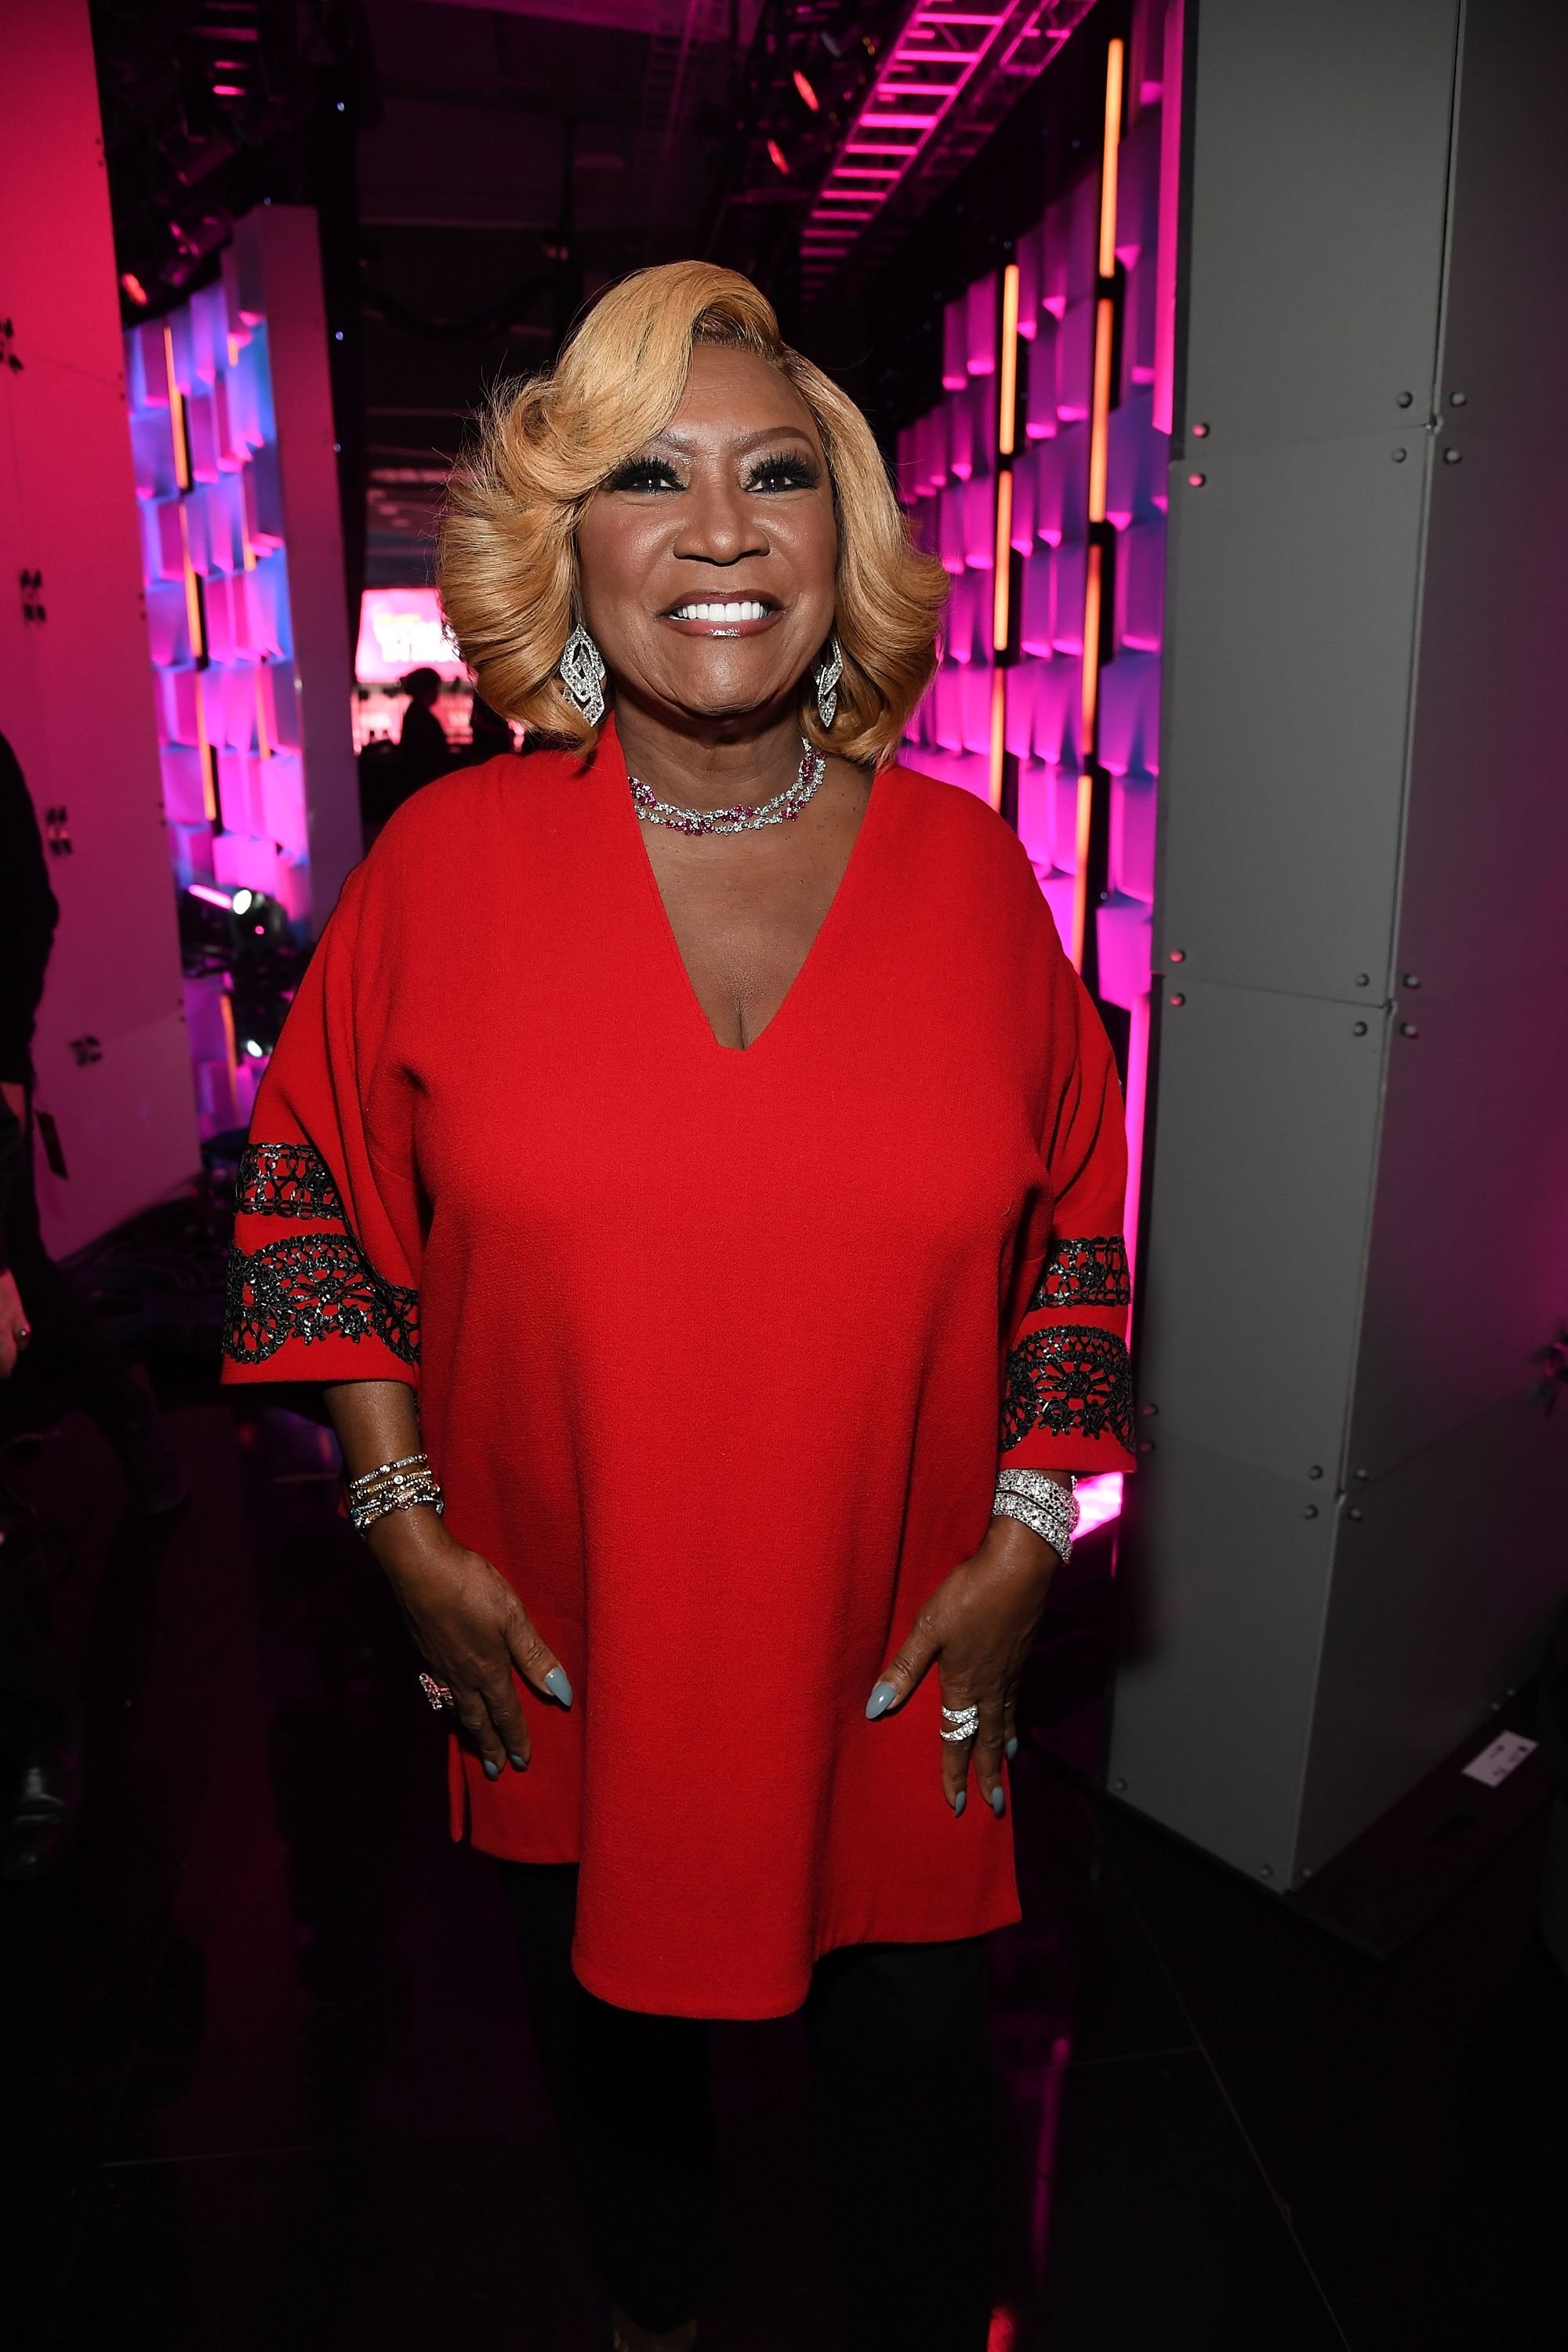 Patti LaBelle during Billboard Women In Music 2018 on December 6, 2018. | Source: Getty Images